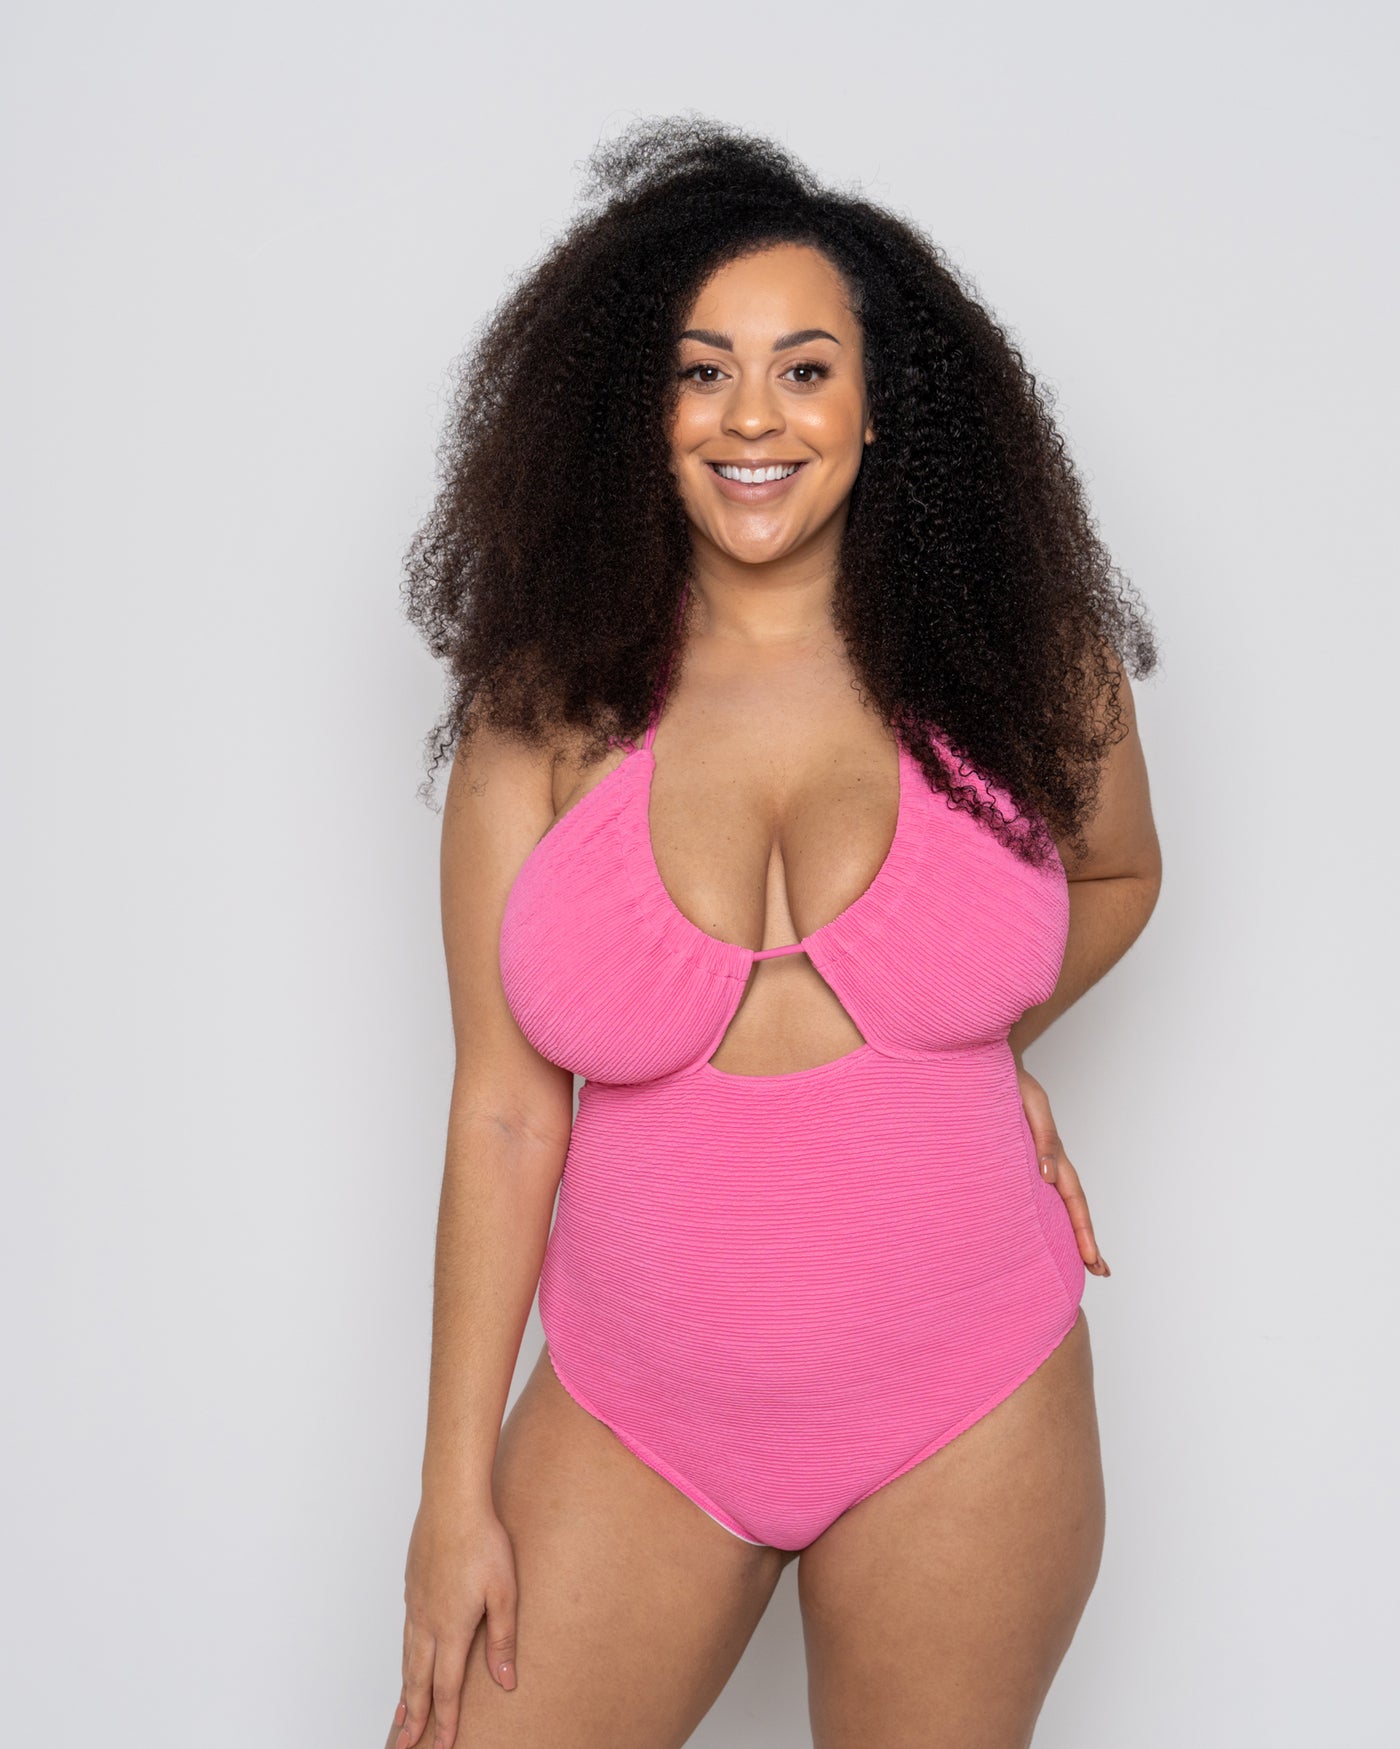 Ivory Rose Bright Pink Scrunch Halter Swimsuit - Chic Style 3